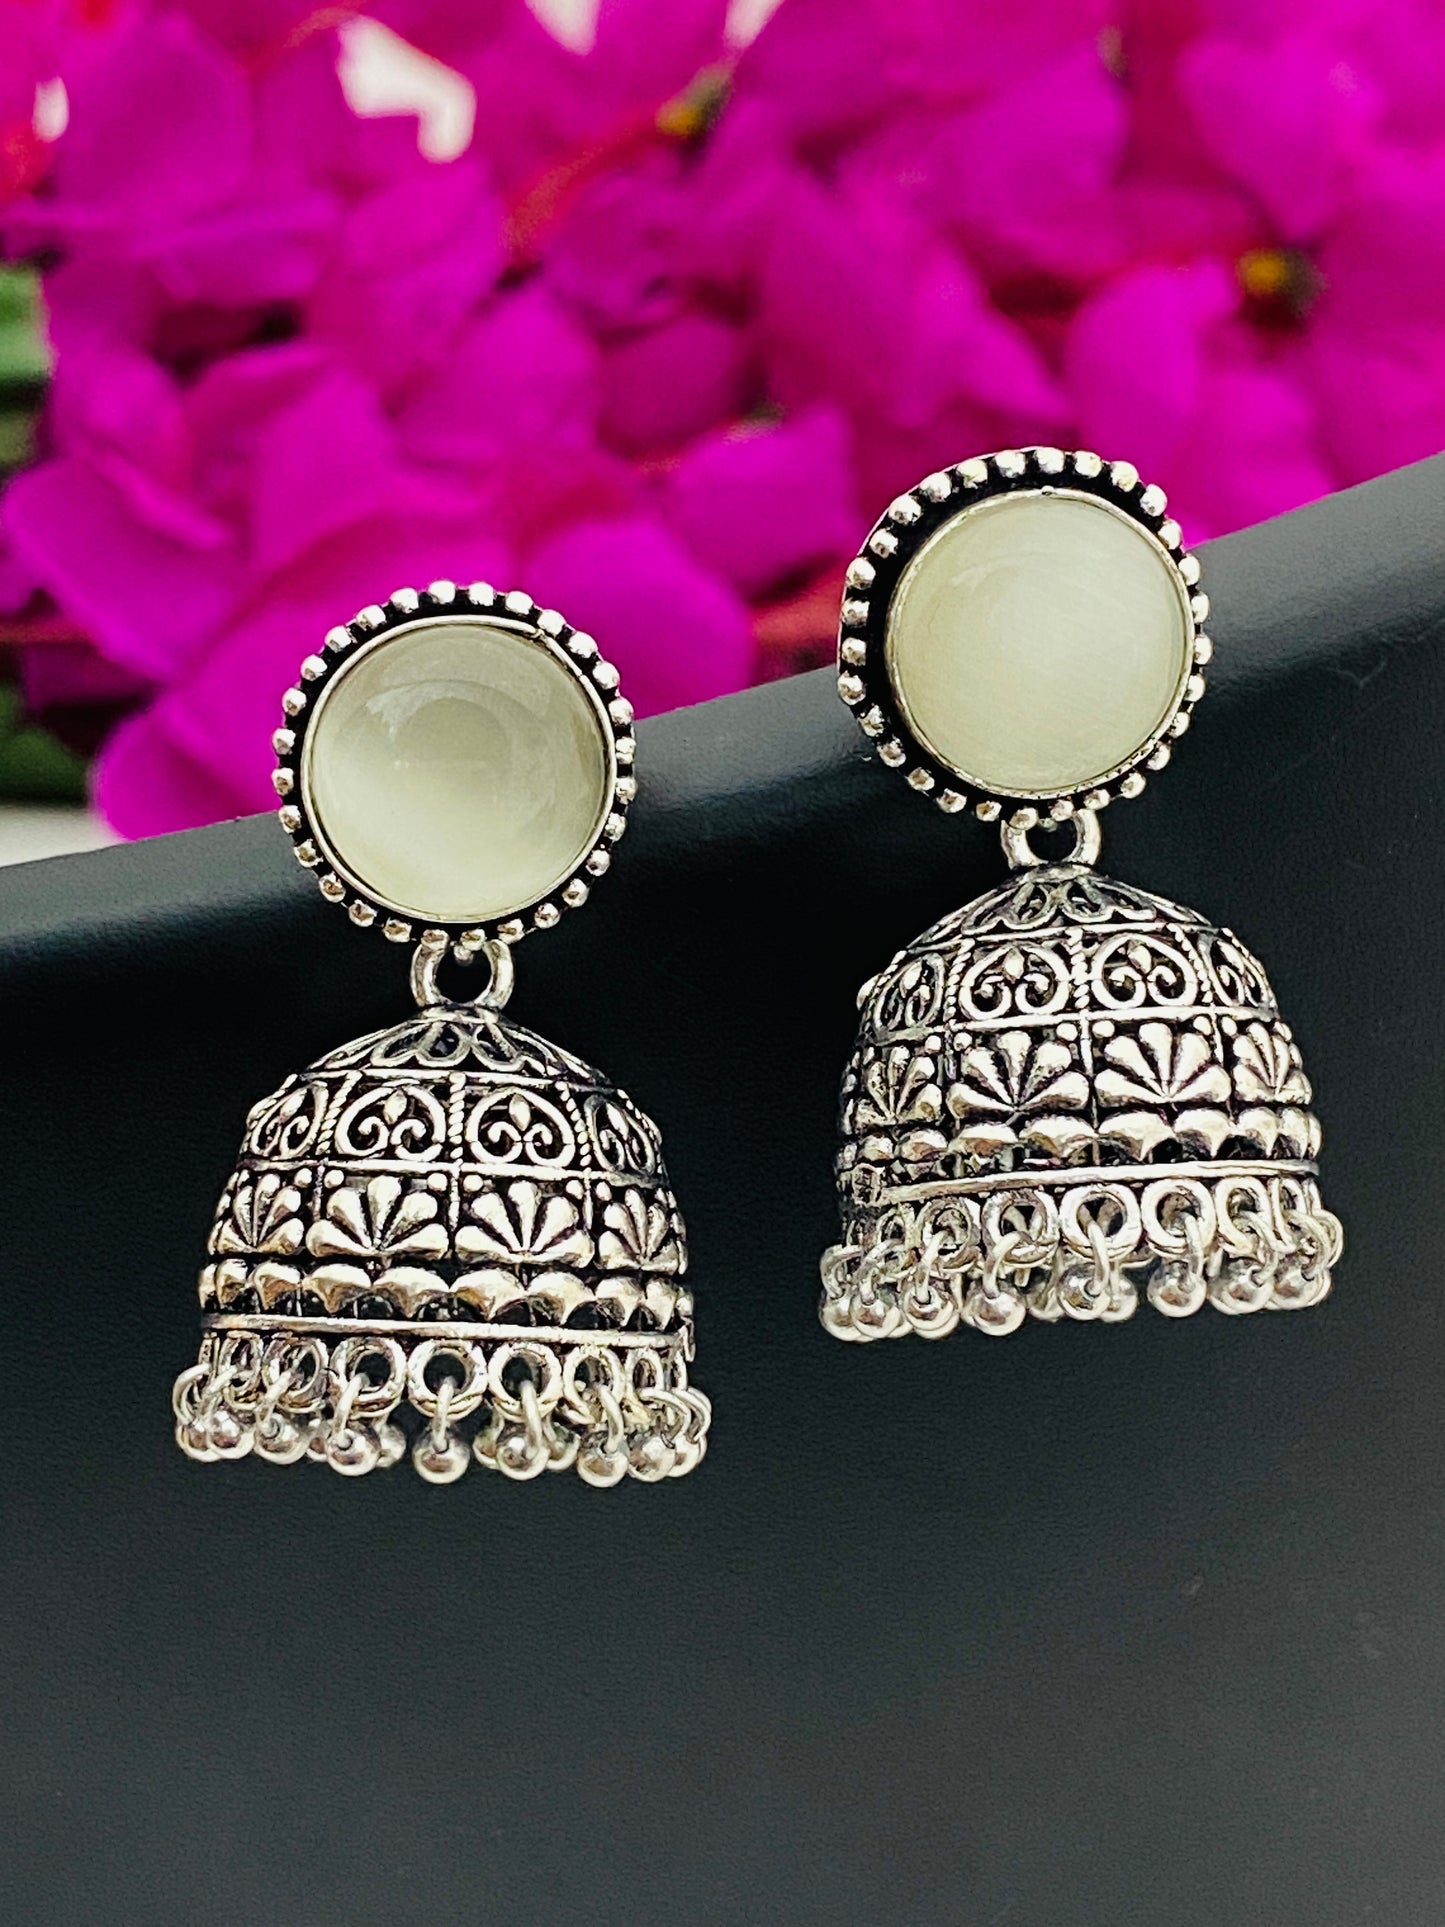 Lovely Stone Beaded Silver Toned Oxidized Jhumka Earrings With Black Pearl Beads